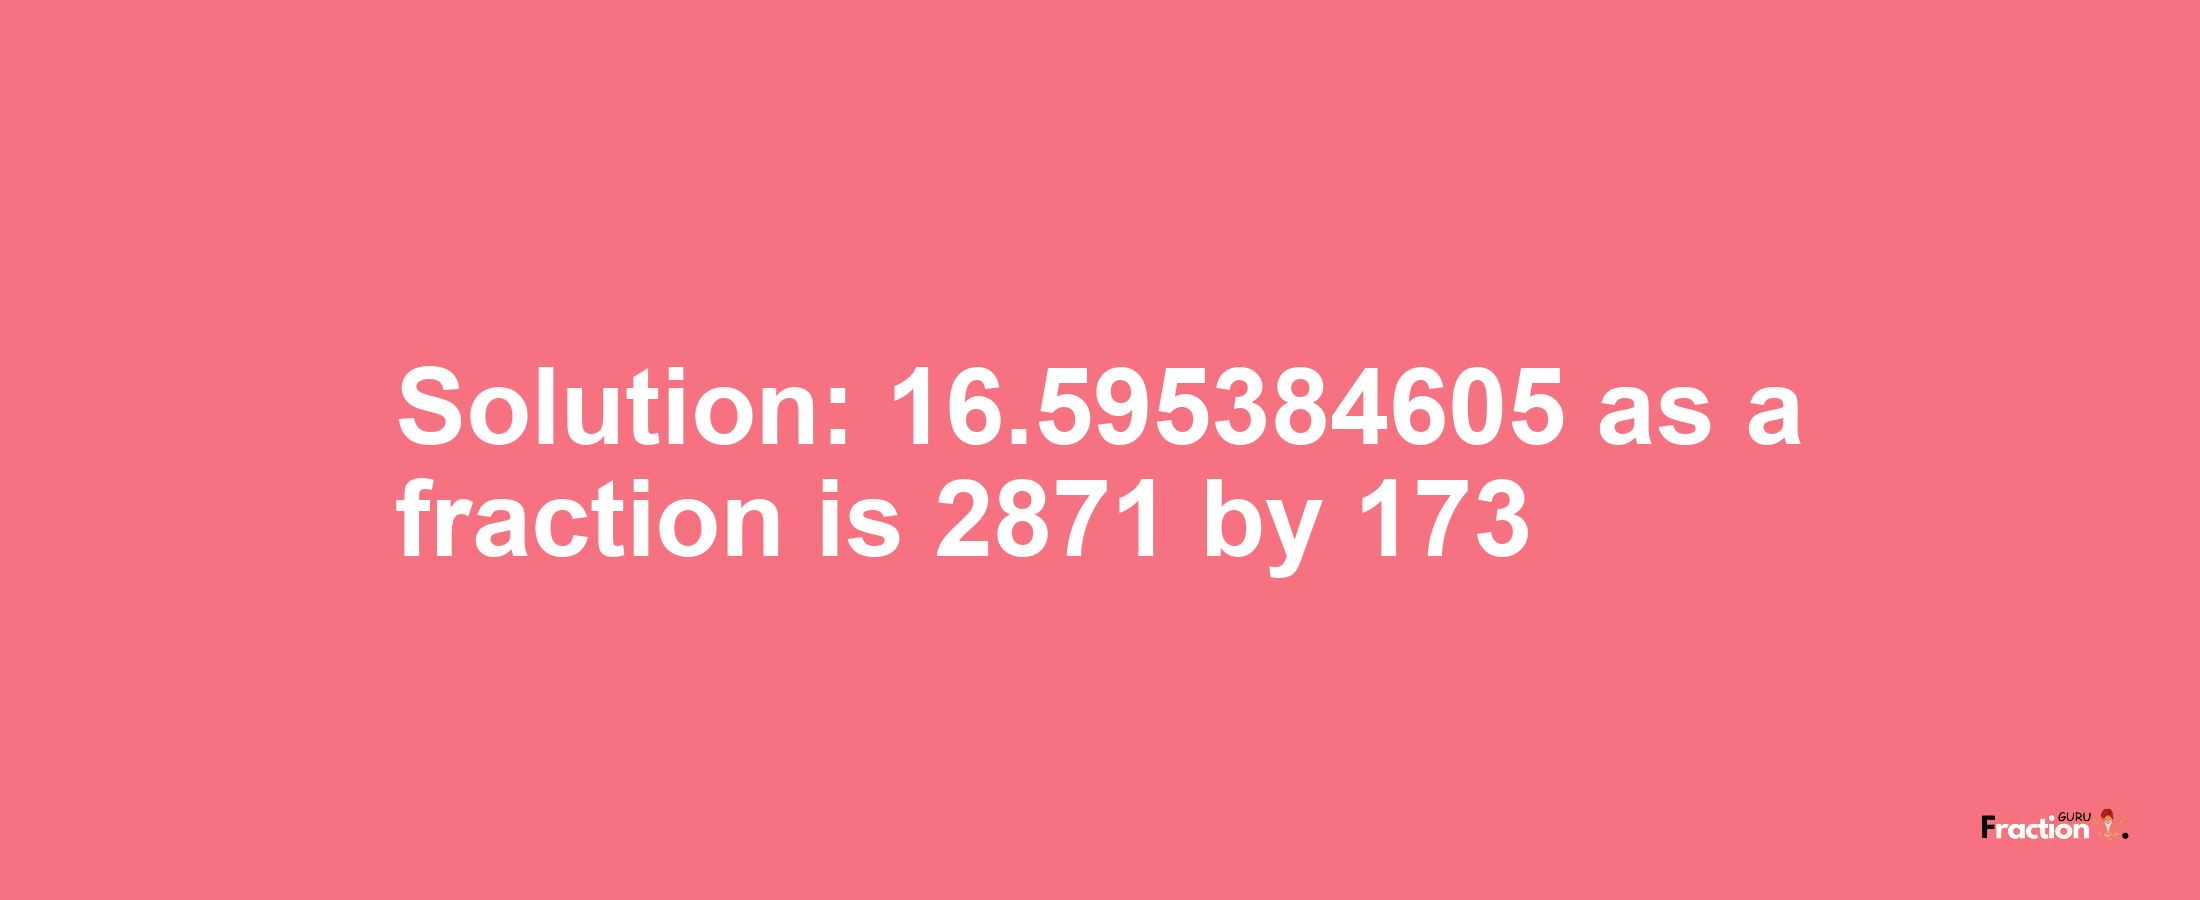 Solution:16.595384605 as a fraction is 2871/173